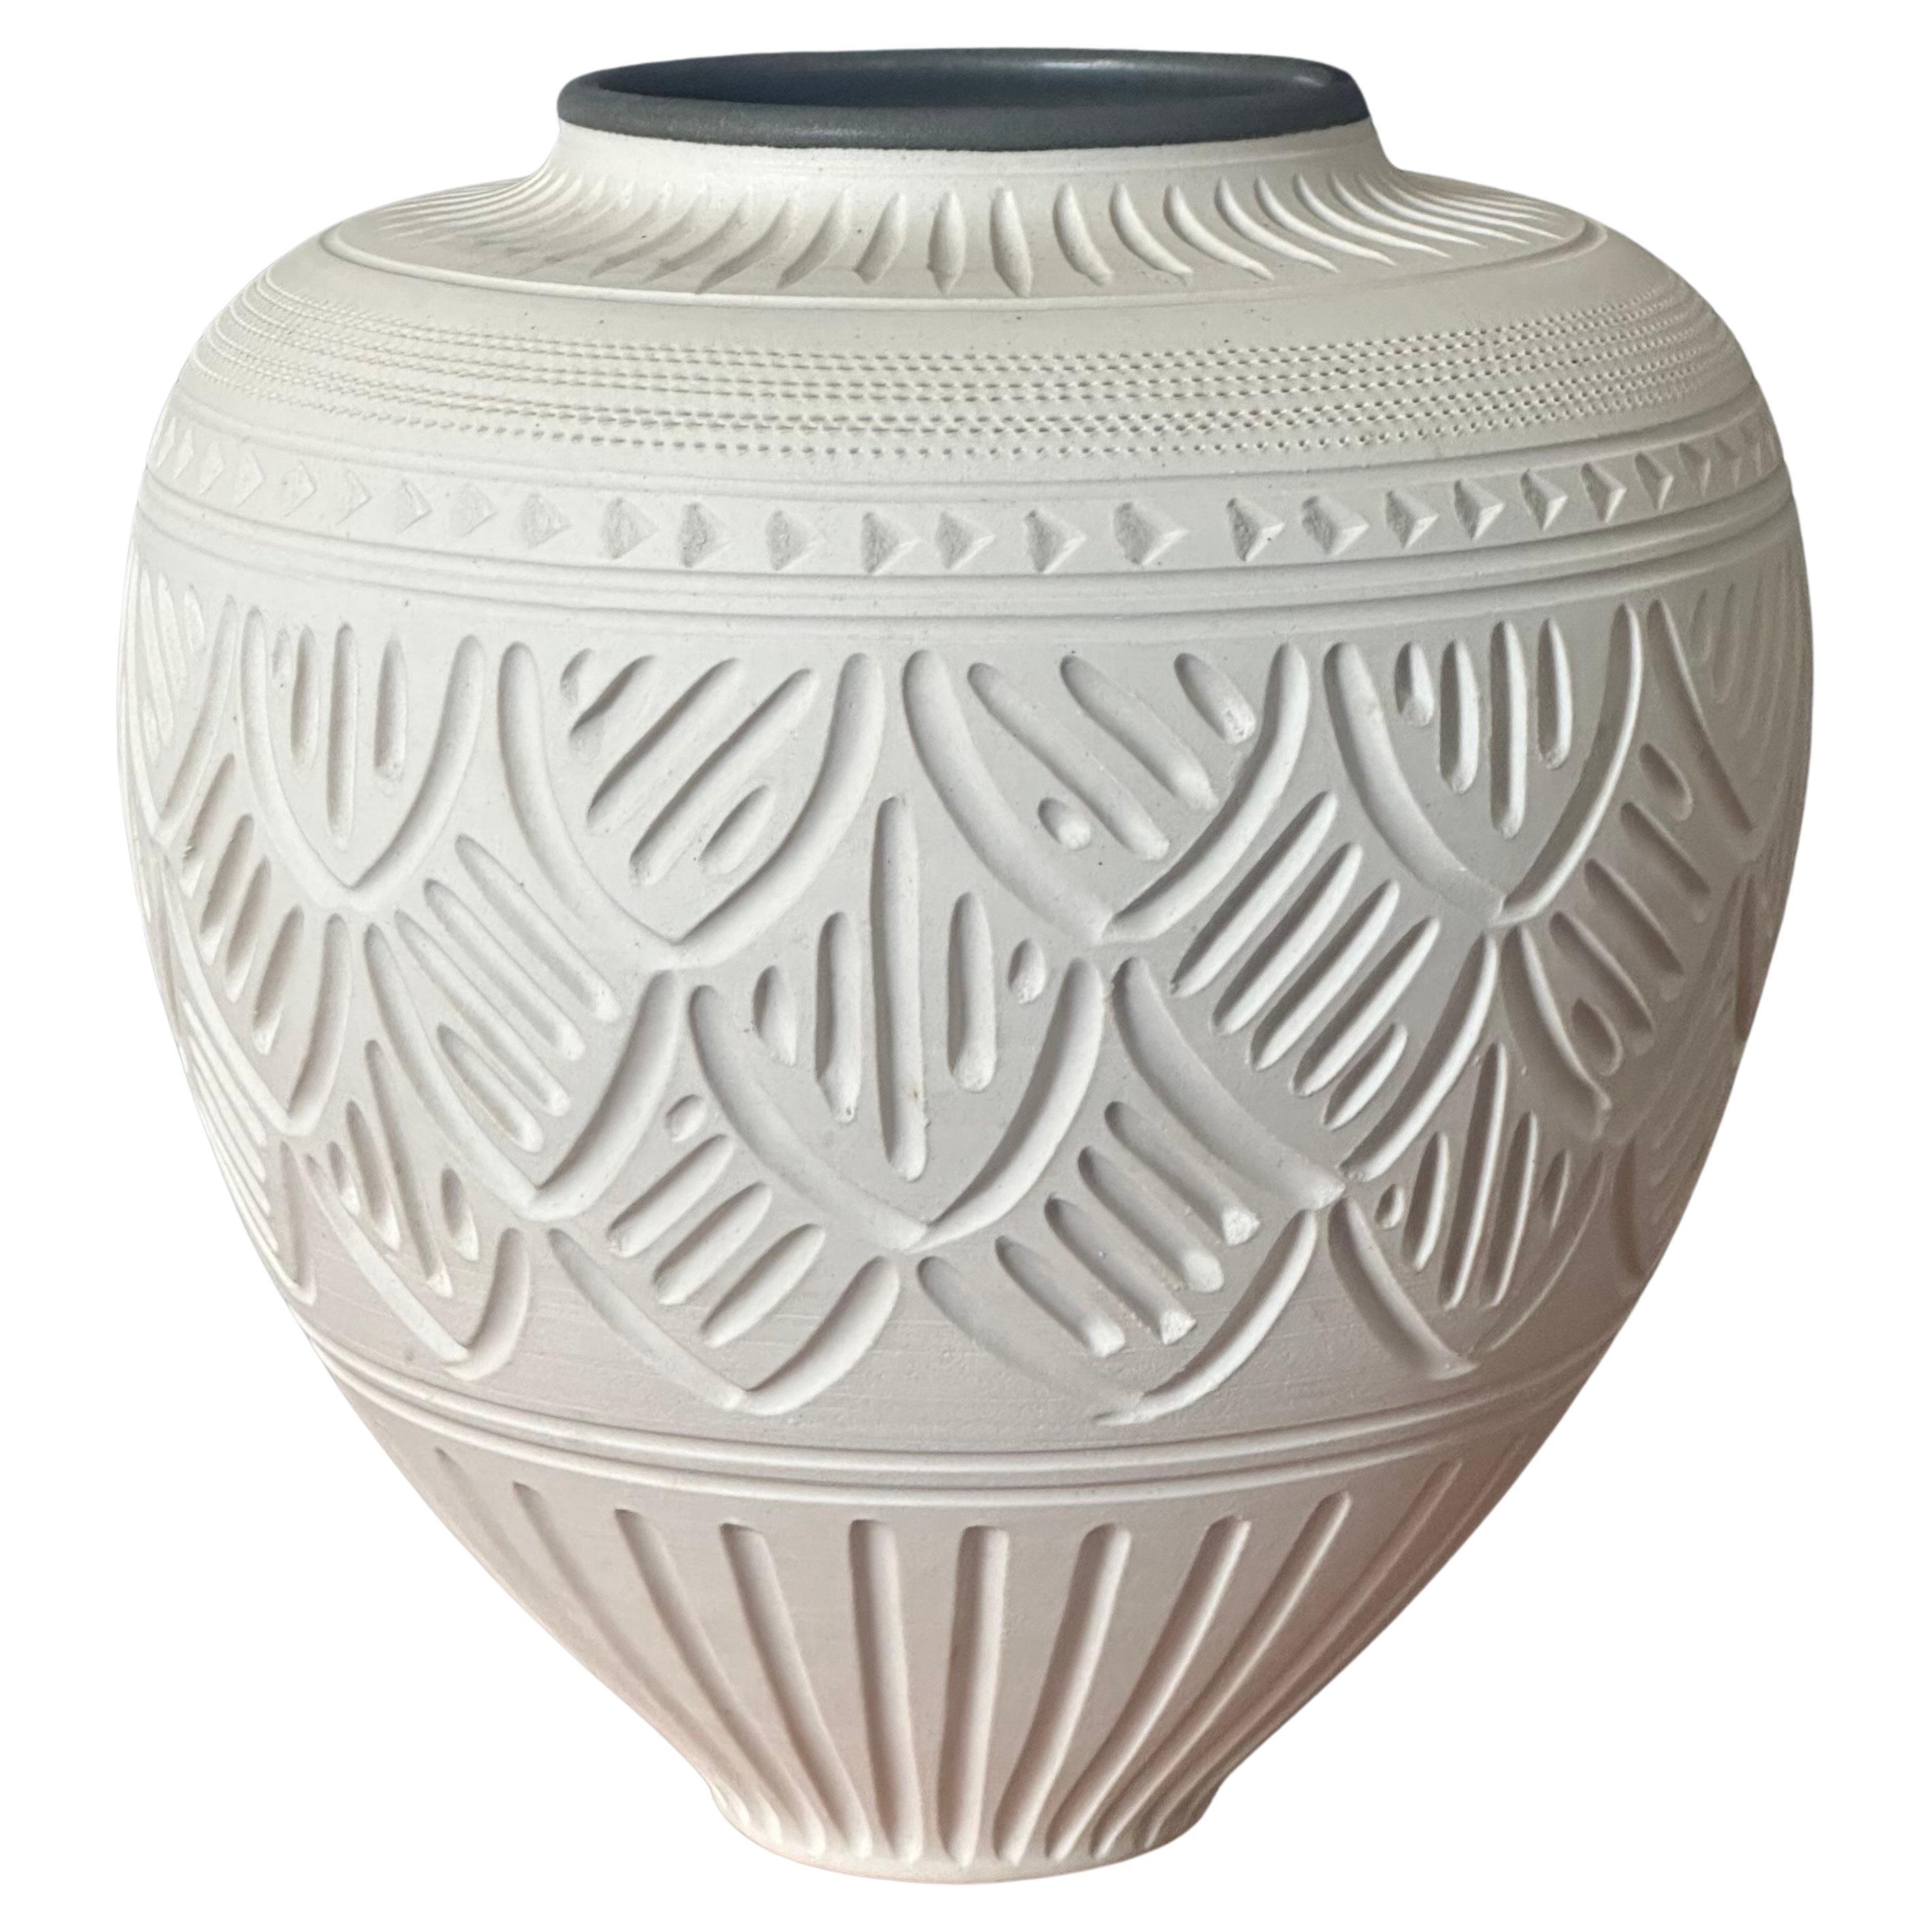 Incised Geometric Design Bisque Porcelain Vase by Nancy Smith For Sale